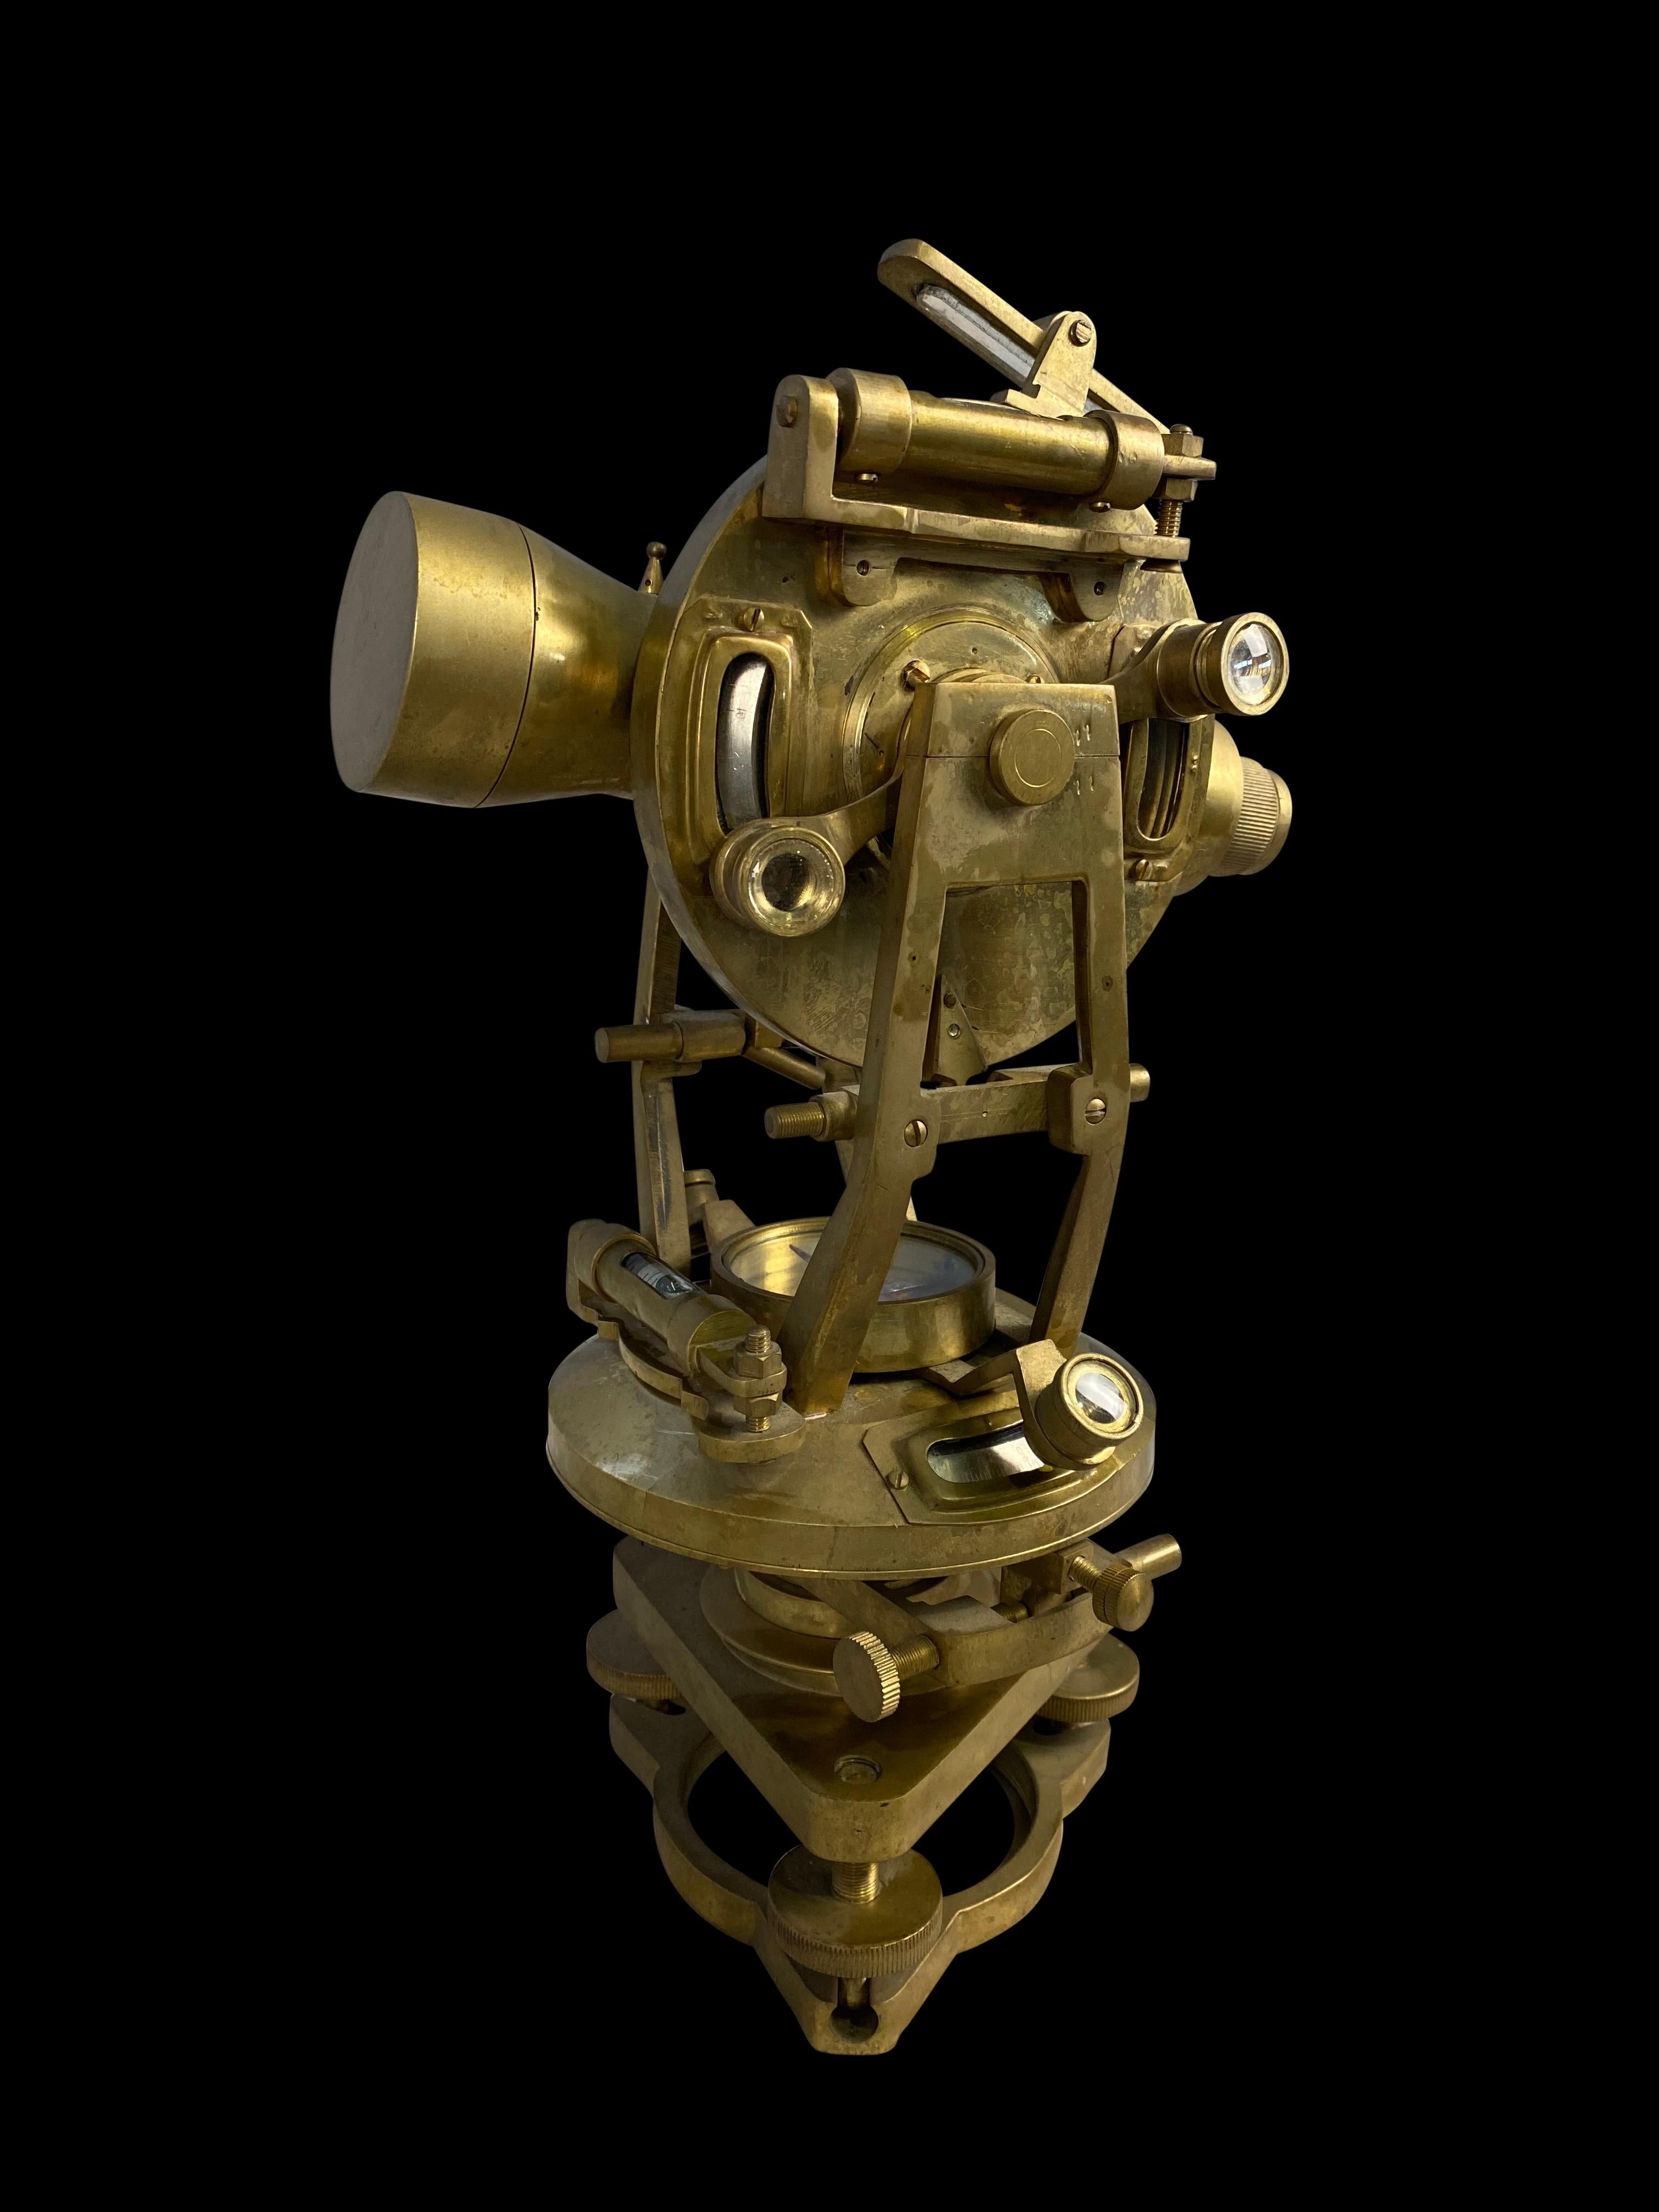 This theodolite is a precision instrument used for measuring angles both horizontally and vertically via a rotation along both axis. An impressive collector's piece for display in a handsome room. 

Dimensions (cm) 
34 H/20 W/19 D.